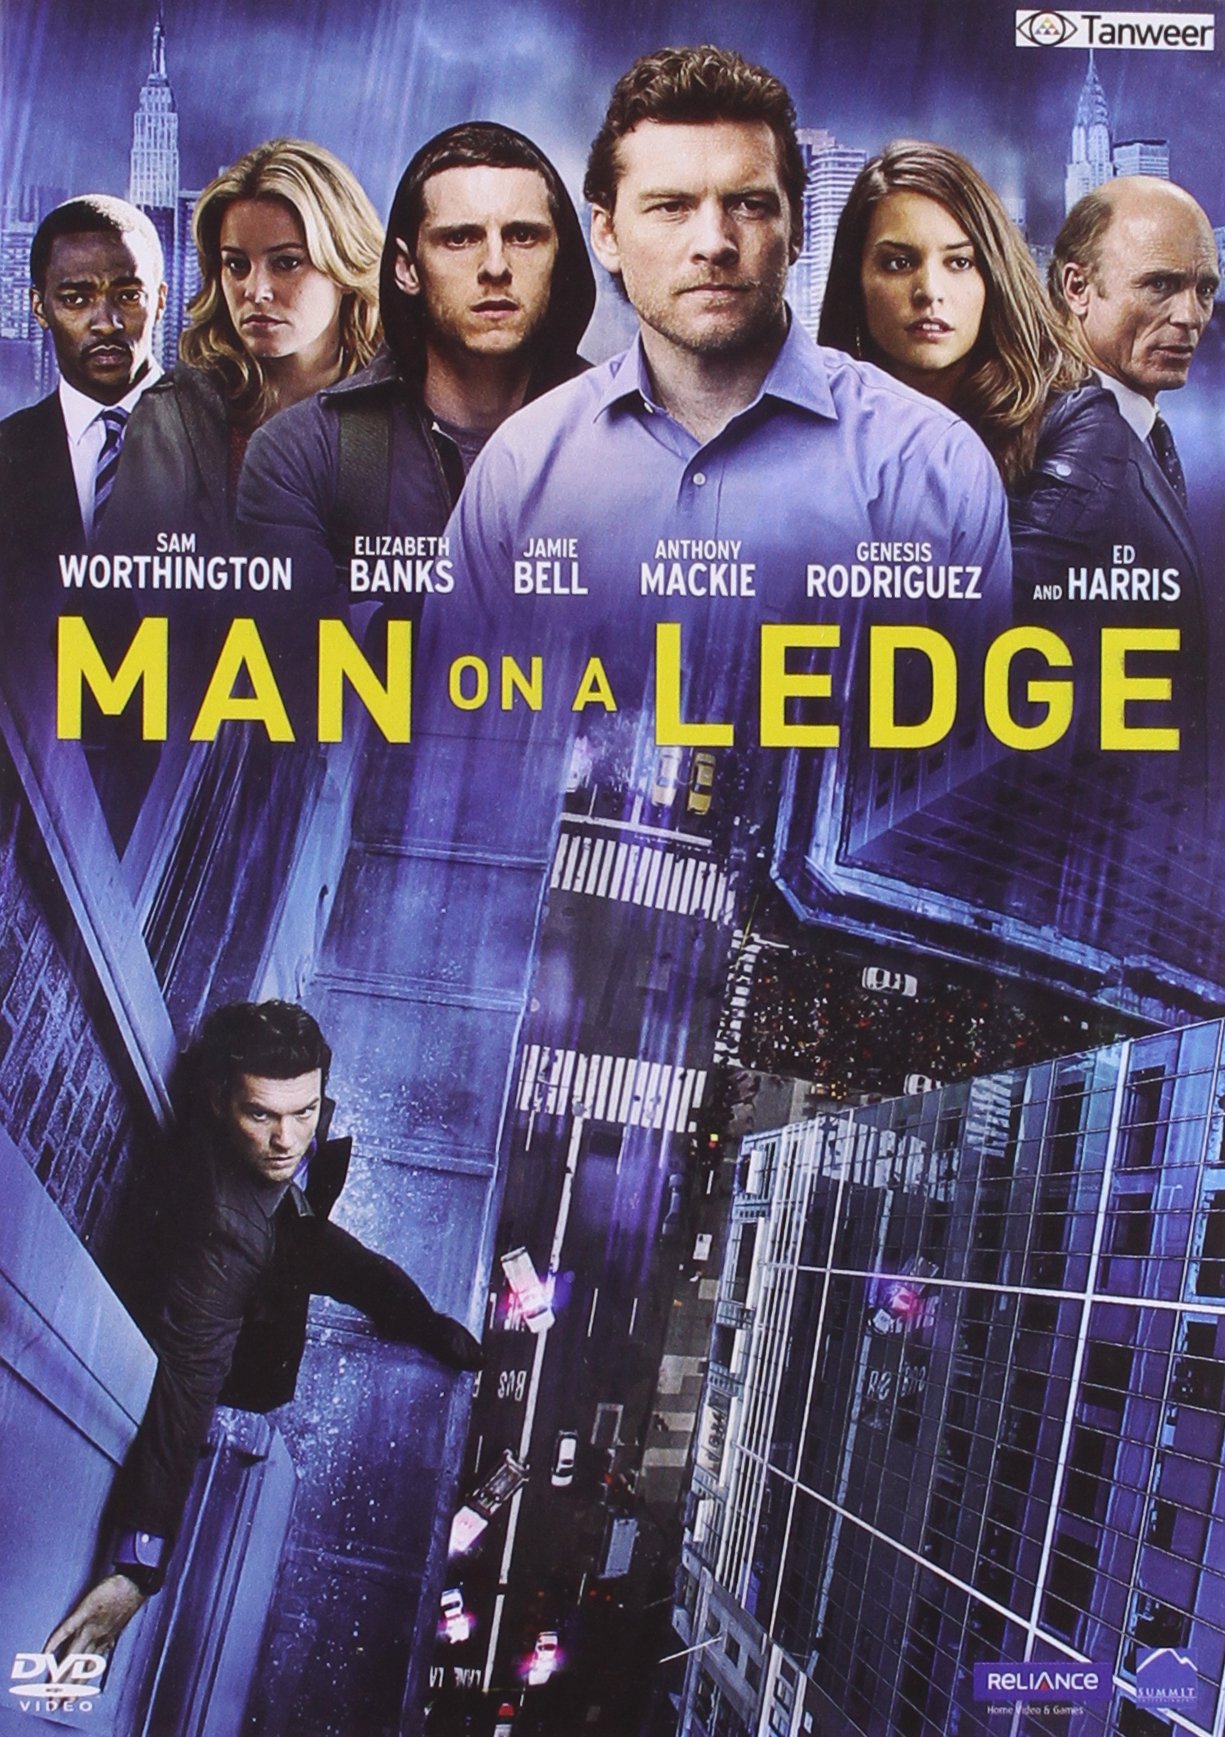 man-on-a-ledge-movie-purchase-or-watch-online